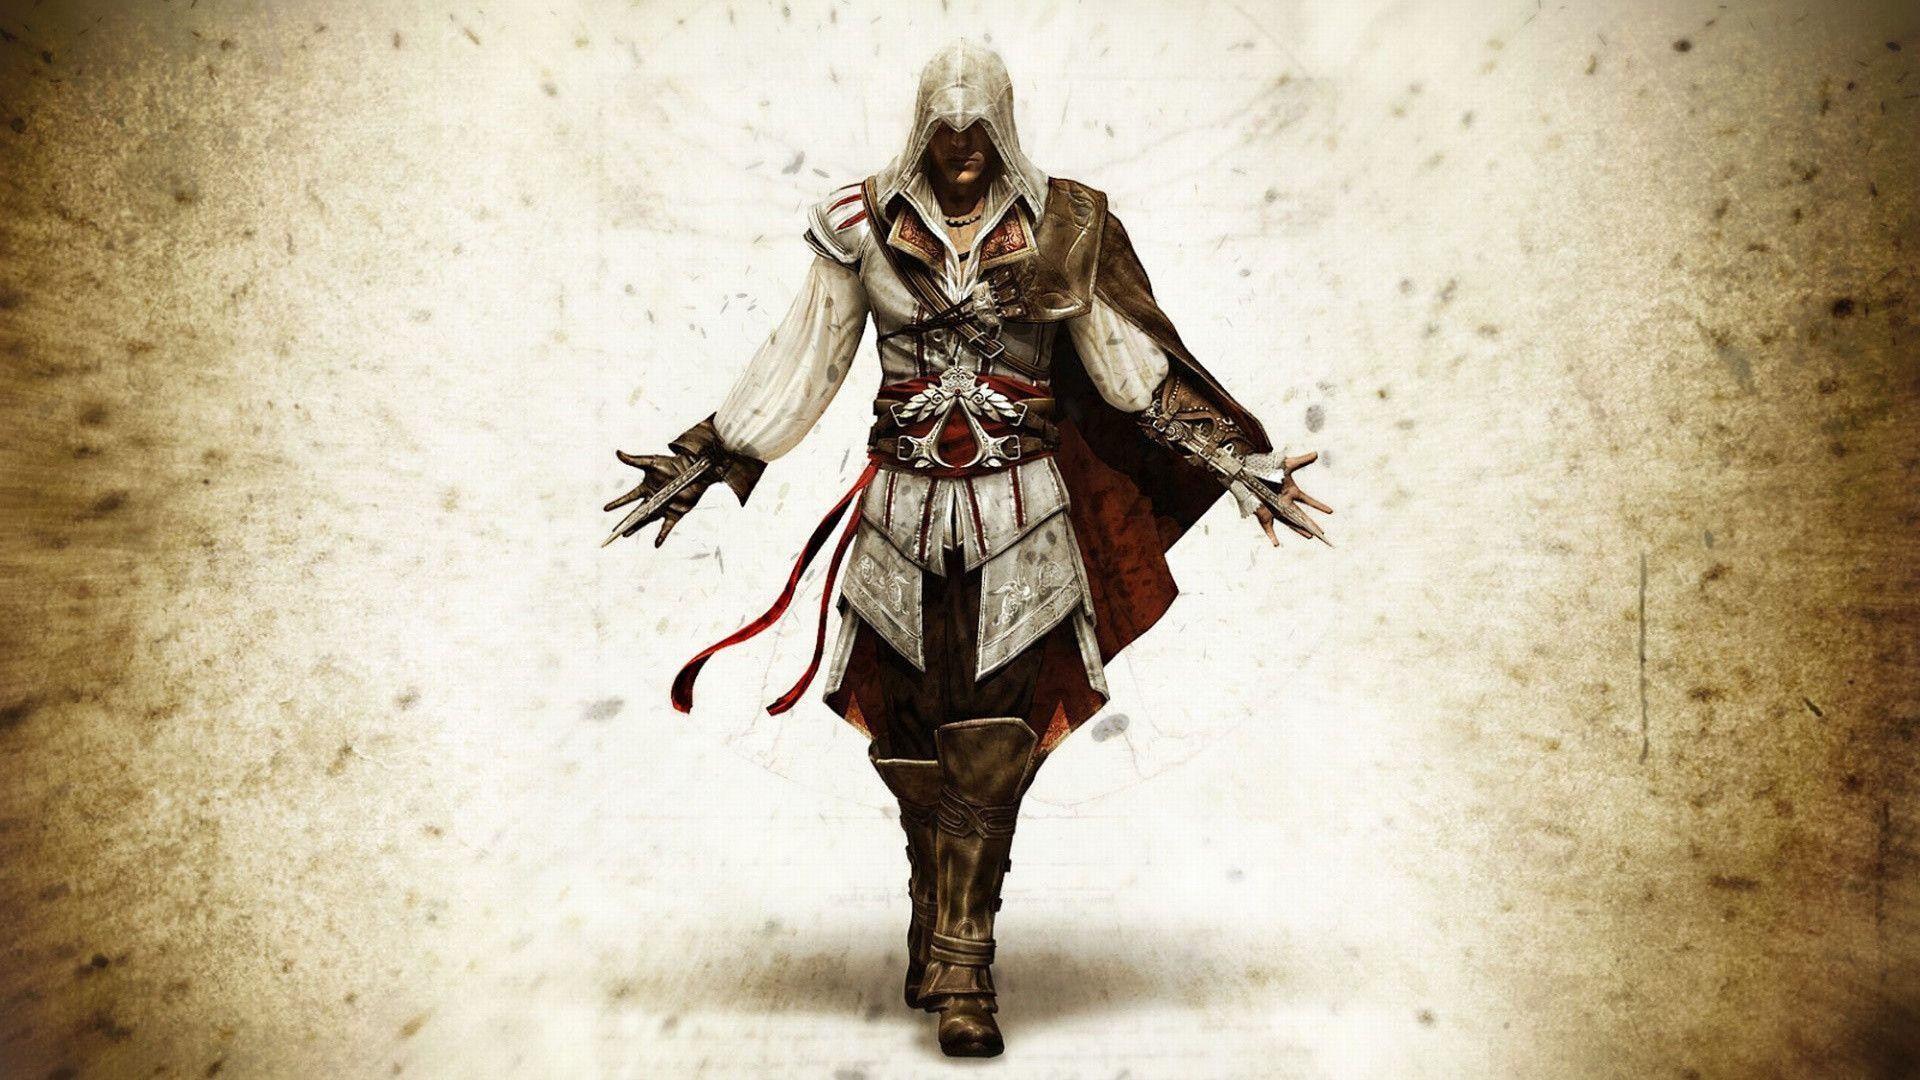 1920x1080 Assassins Creed Hd Wallpapers Assassins Creed Car Pictures